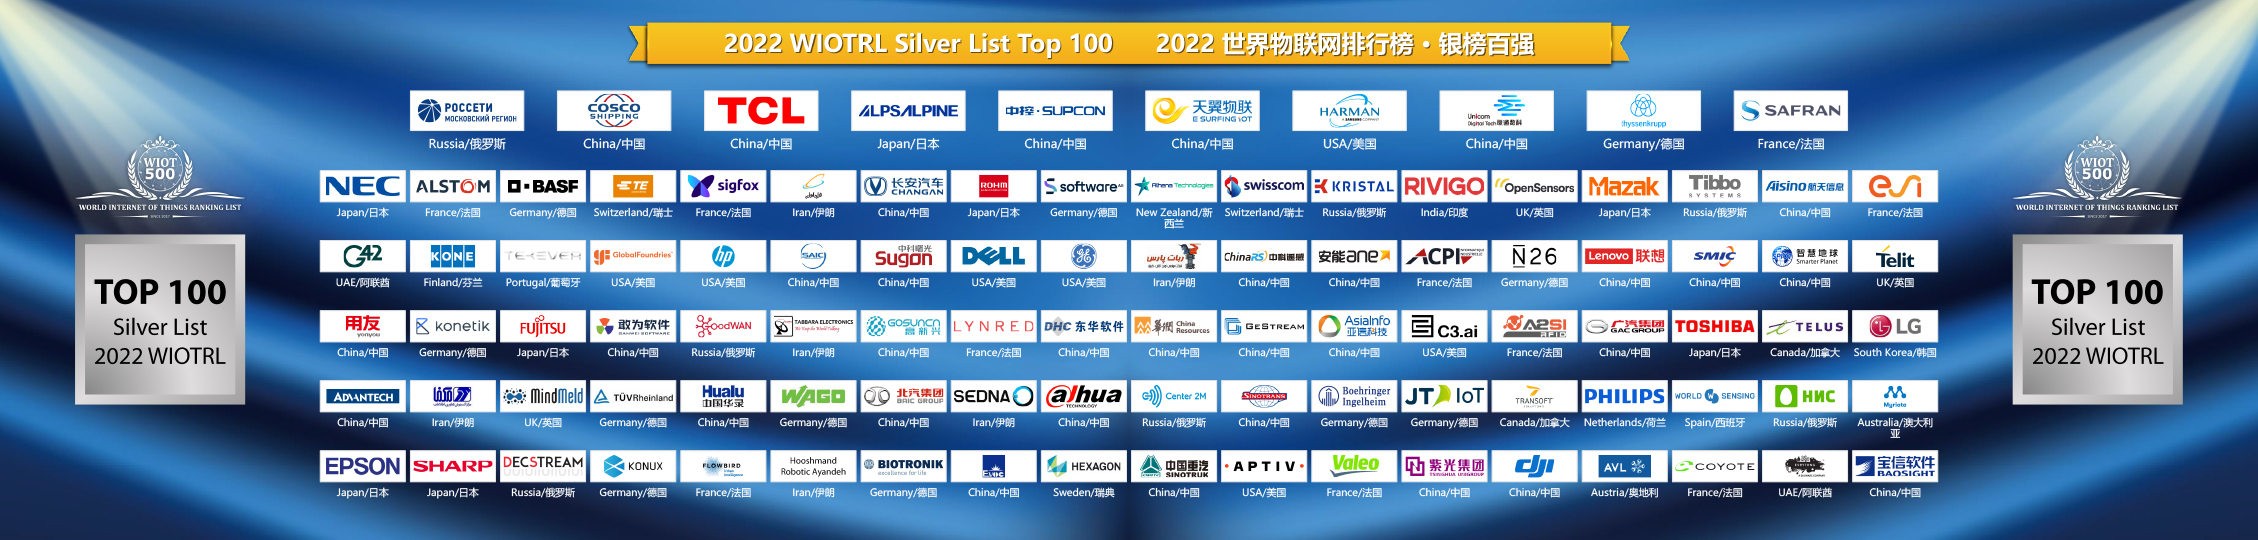 2022 World IoT Ranking List Top 500 Released-Silver List” Top 100